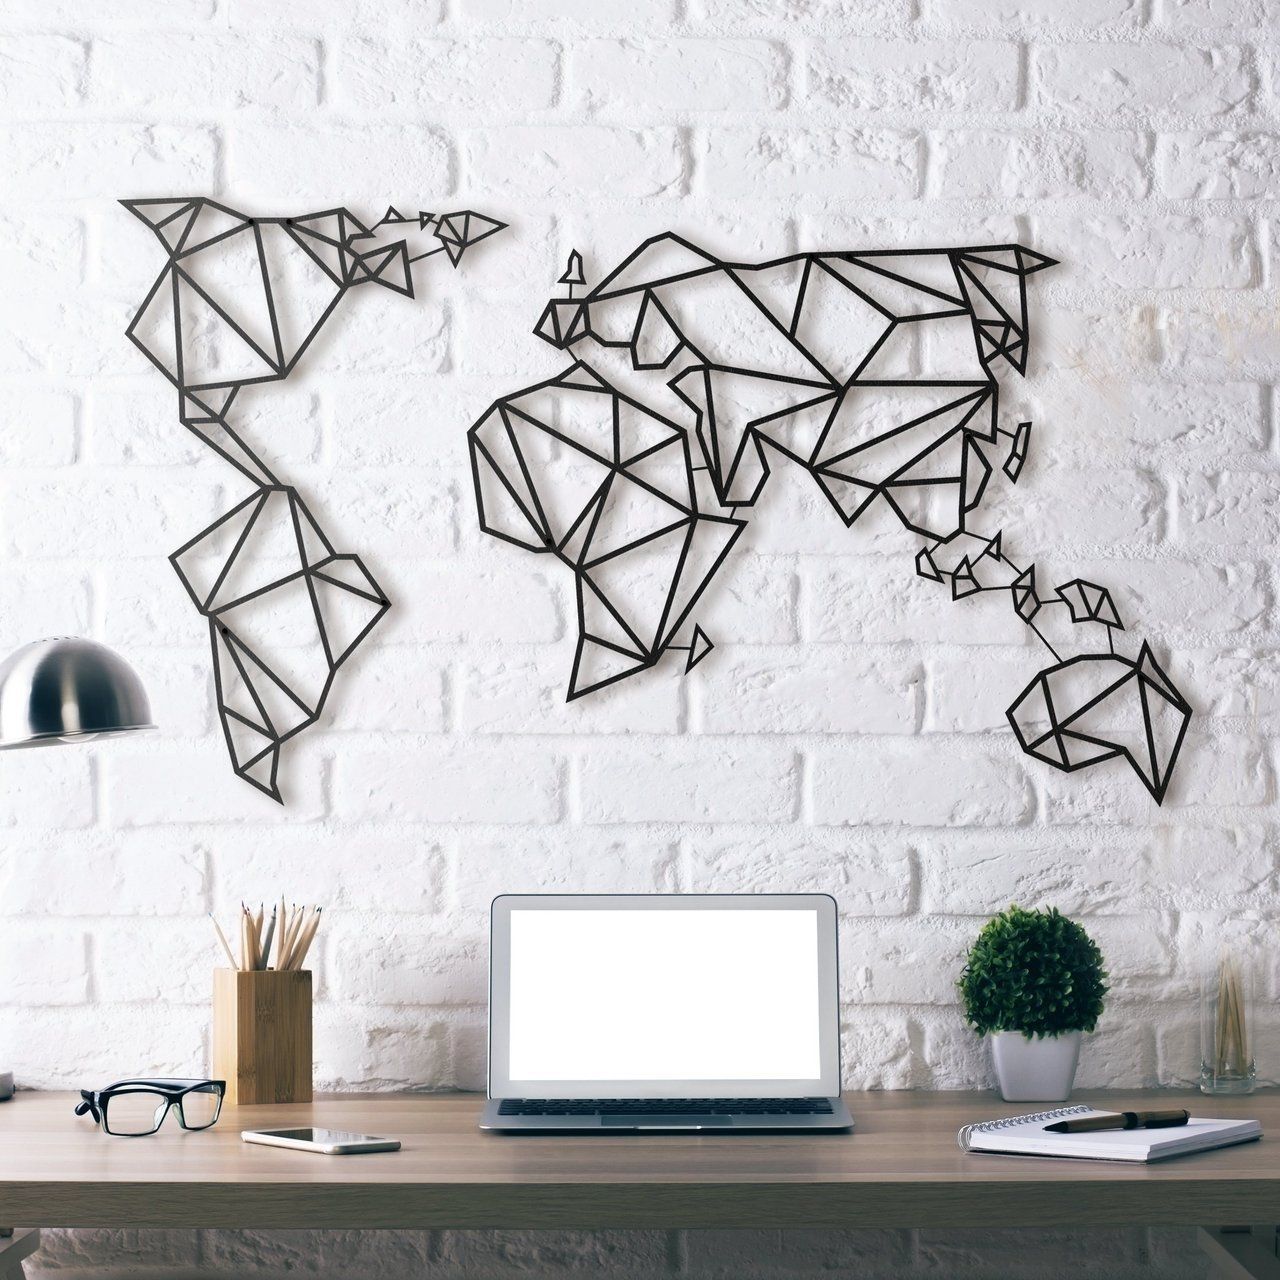 Specifications‾‾‾‾‾‾‾‾‾‾‾‾‾‾‾‾‾‾‾‾‾‾‾‾‾‾‾‾‾‾‾ Measures: 100cm Width Pertaining To World Map Wall Art (View 4 of 20)